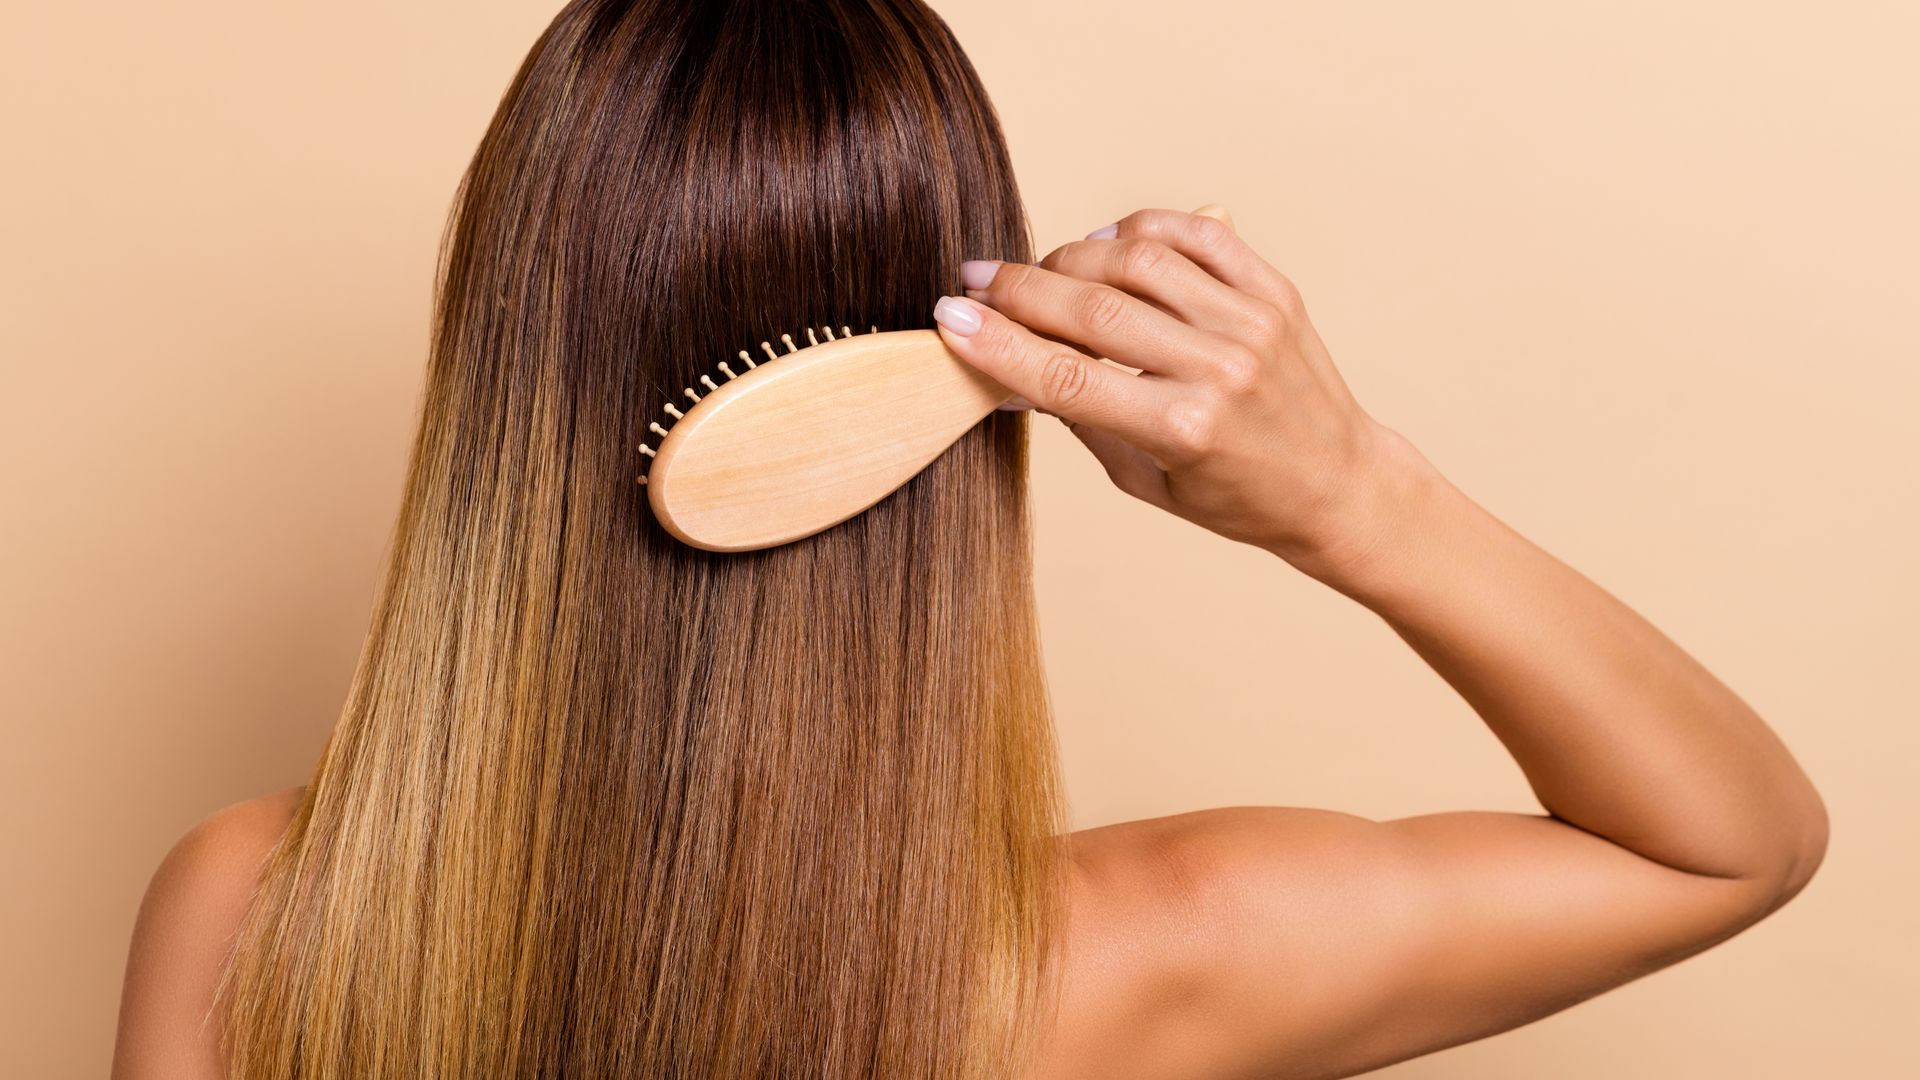 I’m a hair loss expert - these are my top tips for keeping hair healthy during menopause